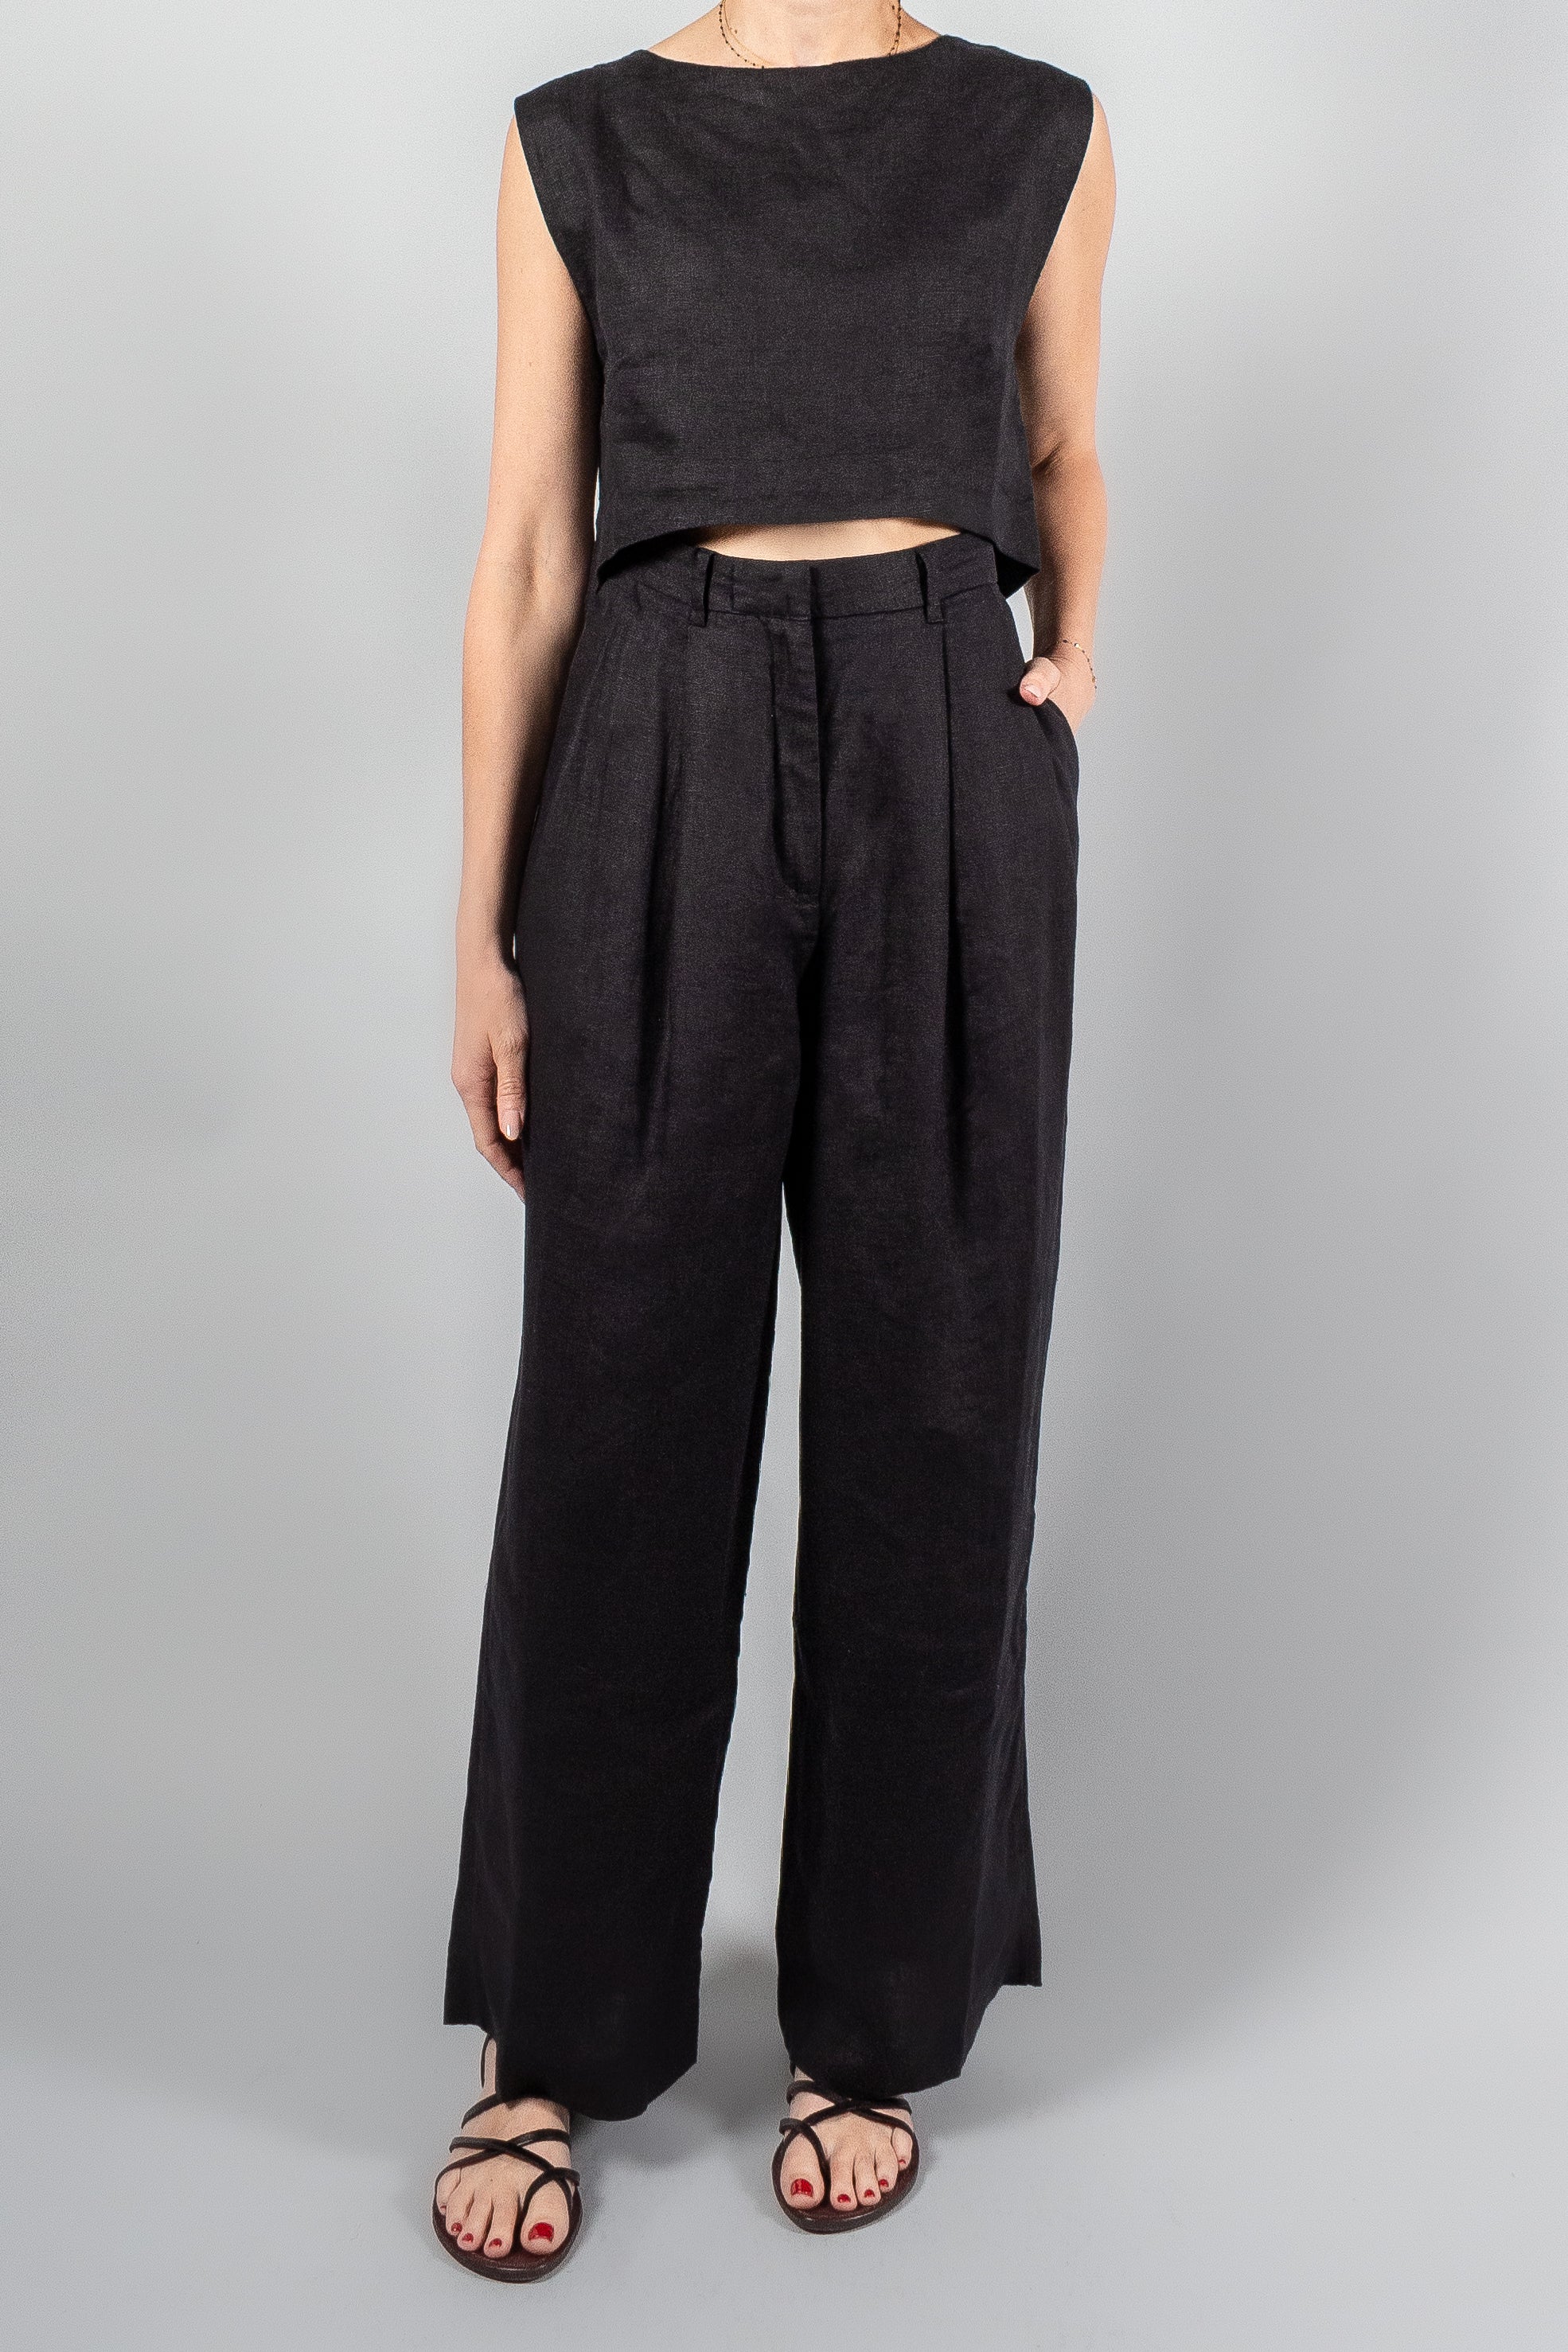 Posse Wyatt Trouser-Pants and Shorts-Misch-Boutique-Vancouver-Canada-misch.ca